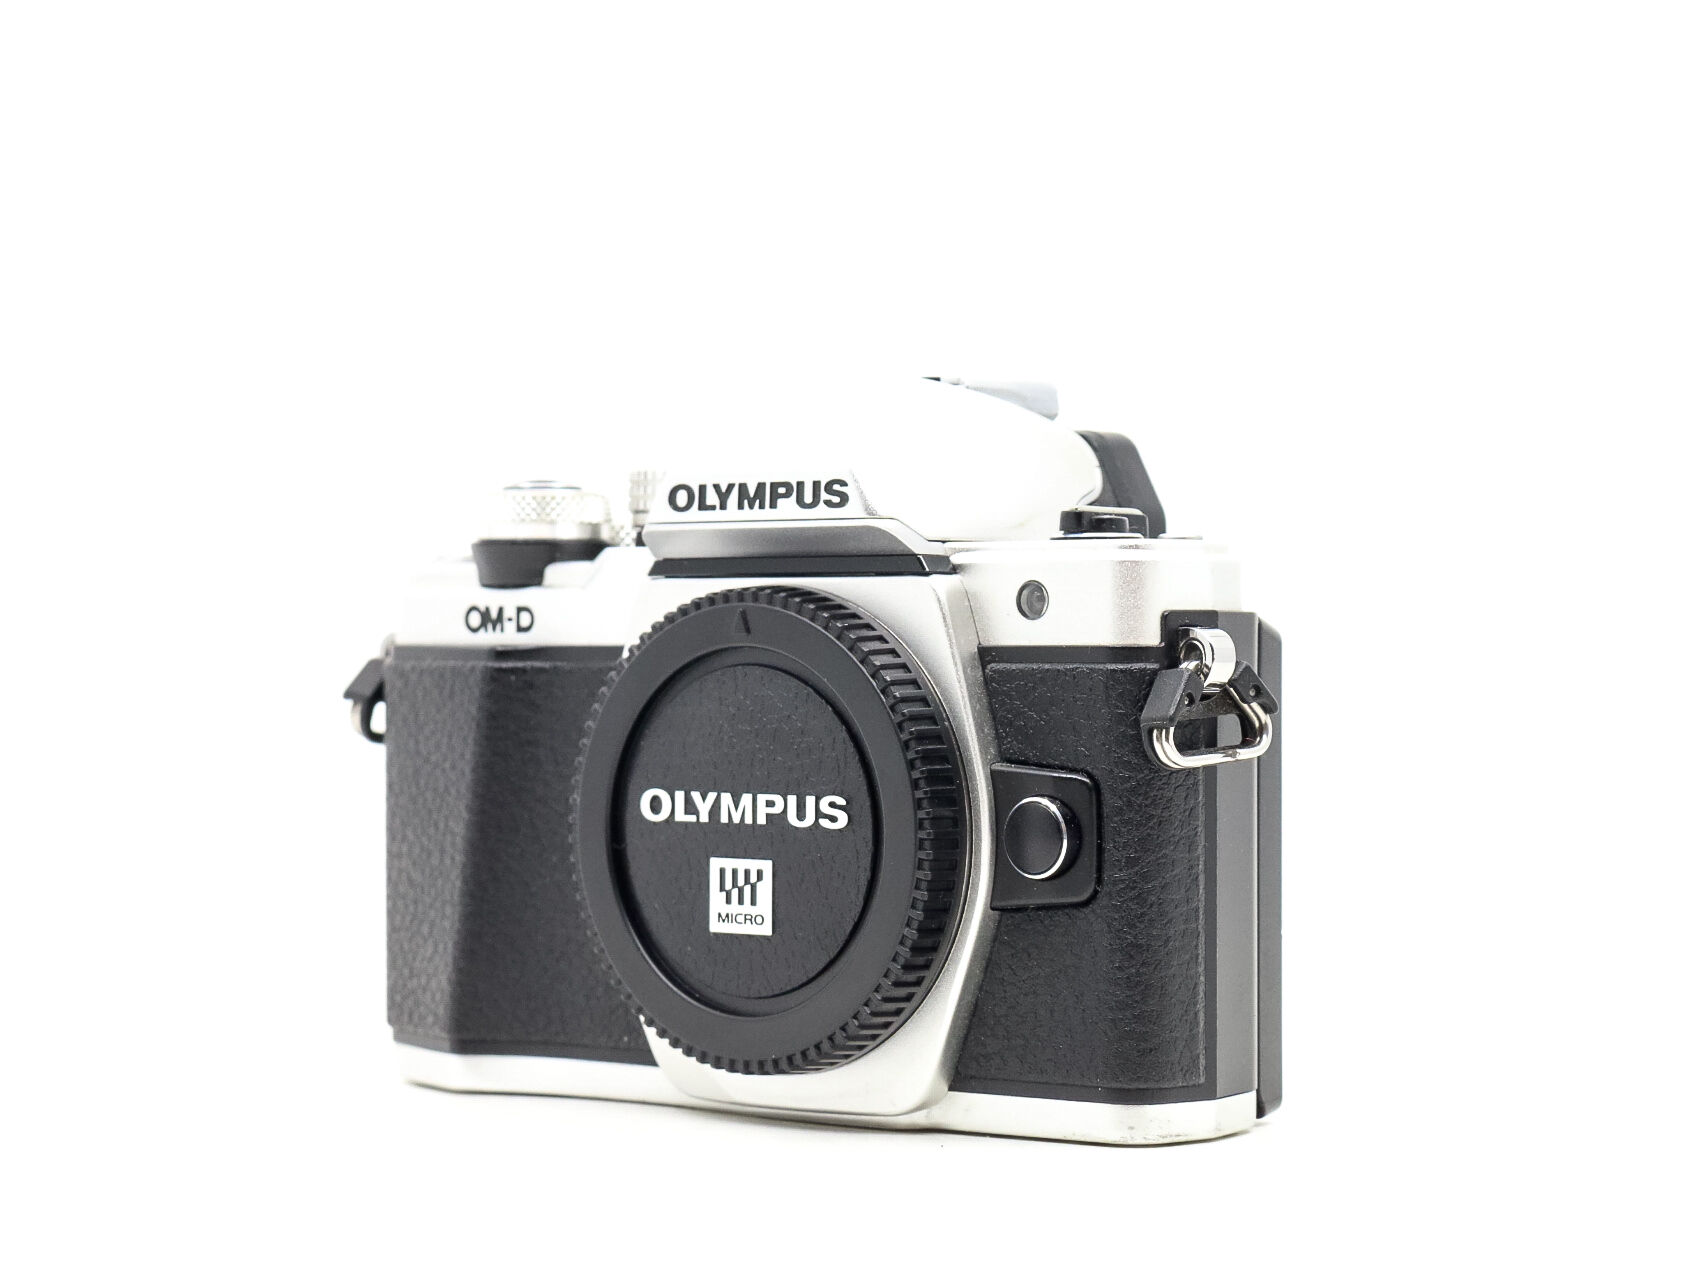 Olympus OM-D E-M10 Mark II (Condition: Excellent)